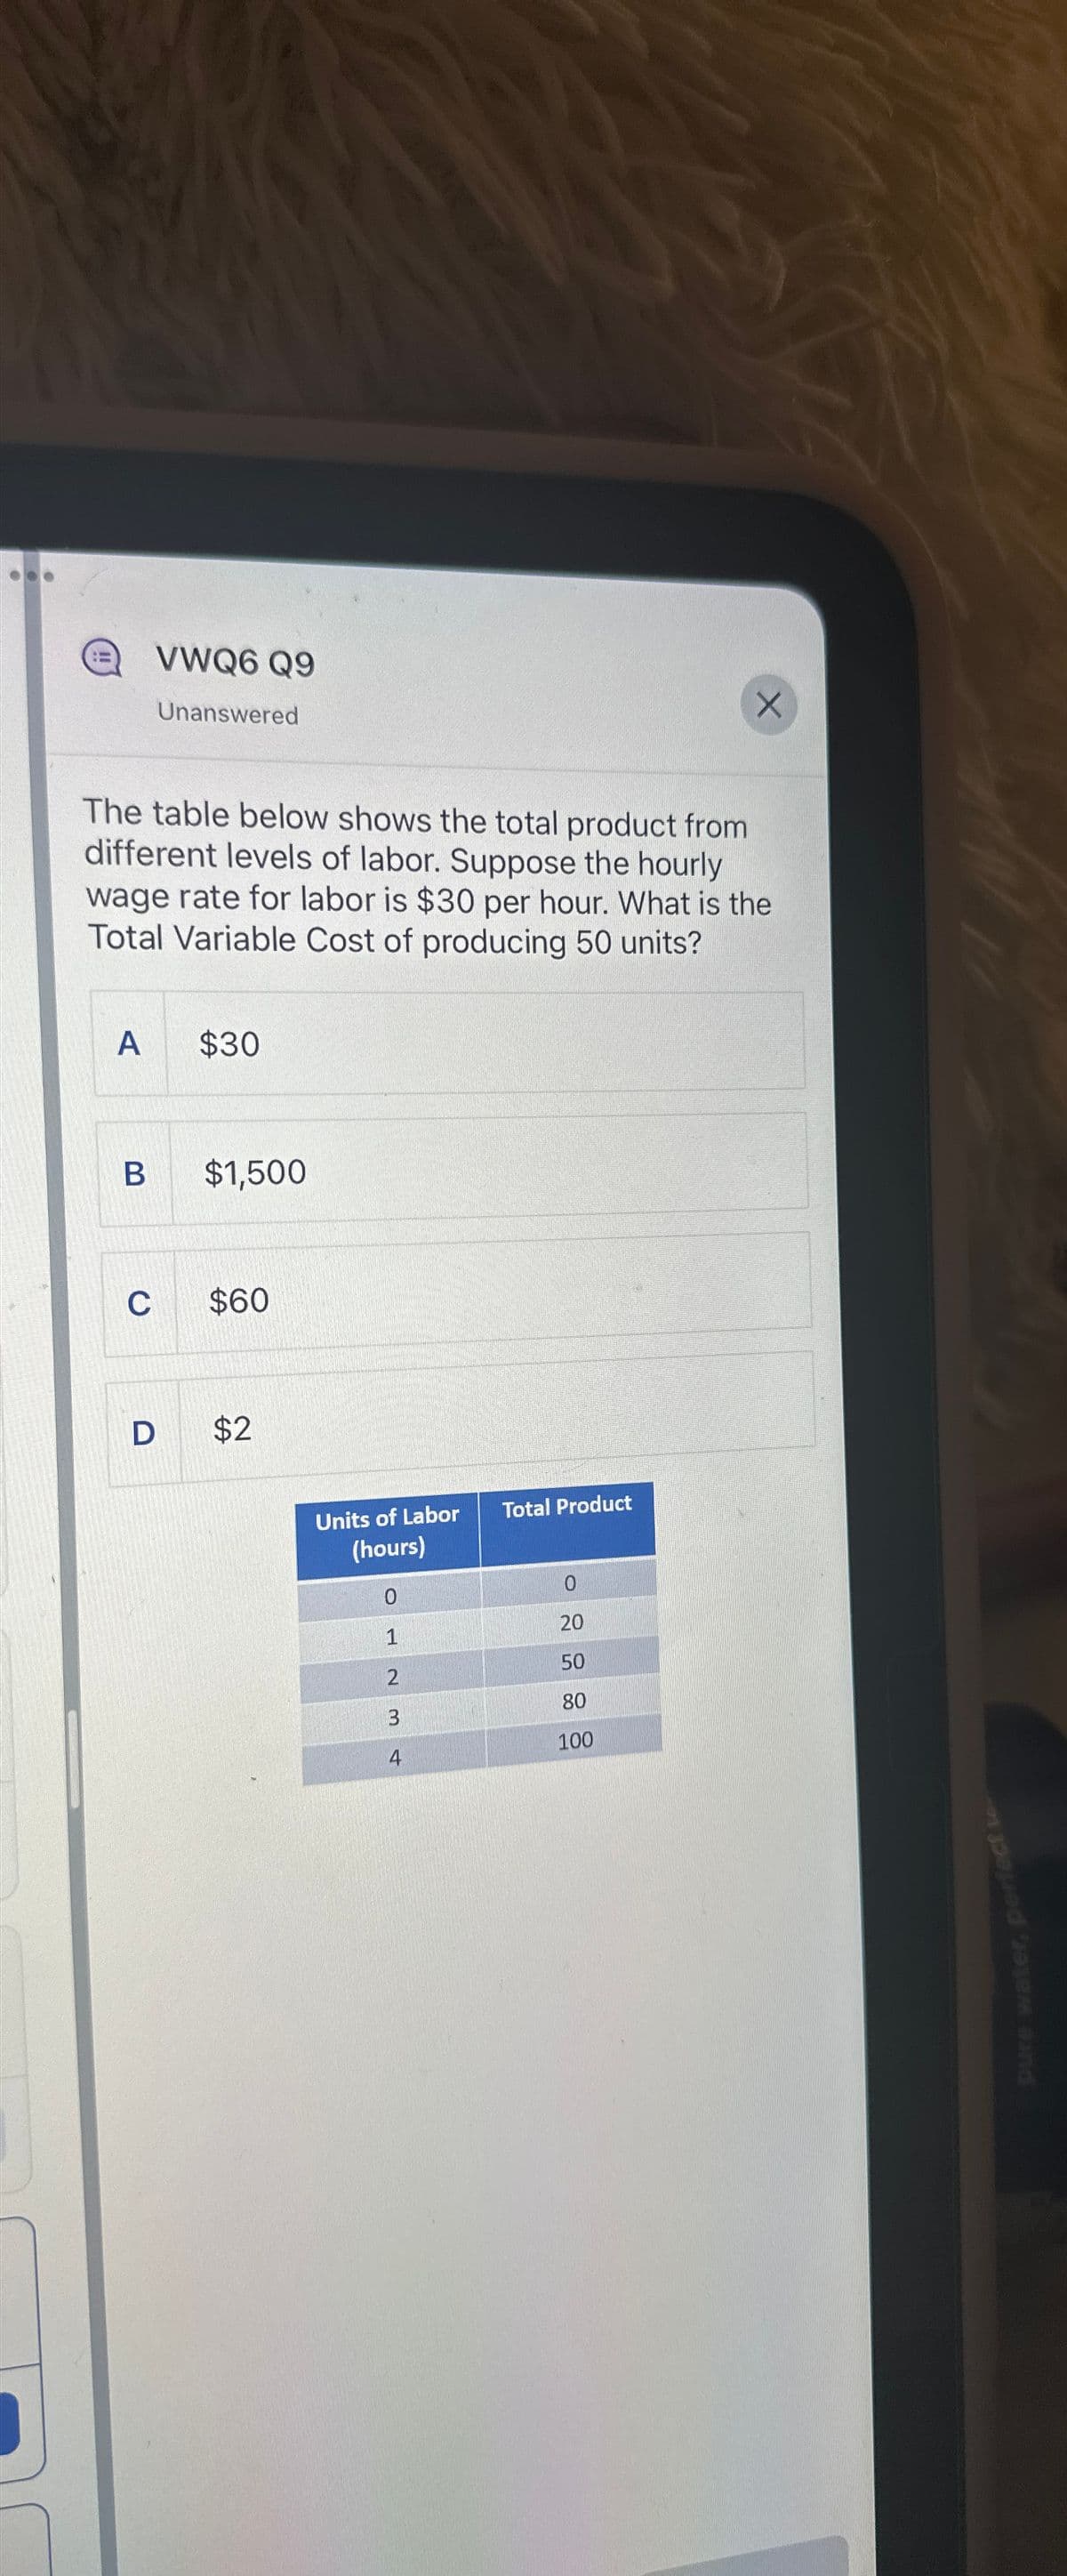 A
VWQ6 Q9
B
Unanswered
The table below shows the total product from
different levels of labor. Suppose the hourly
wage rate for labor is $30 per hour. What is the
Total Variable Cost of producing 50 units?
$30
$1,500
C $60
D $2
Units of Labor
(hours)
0
1
2
3
4
Total Product
X
0
20
50
80
100
pure water, perfect te